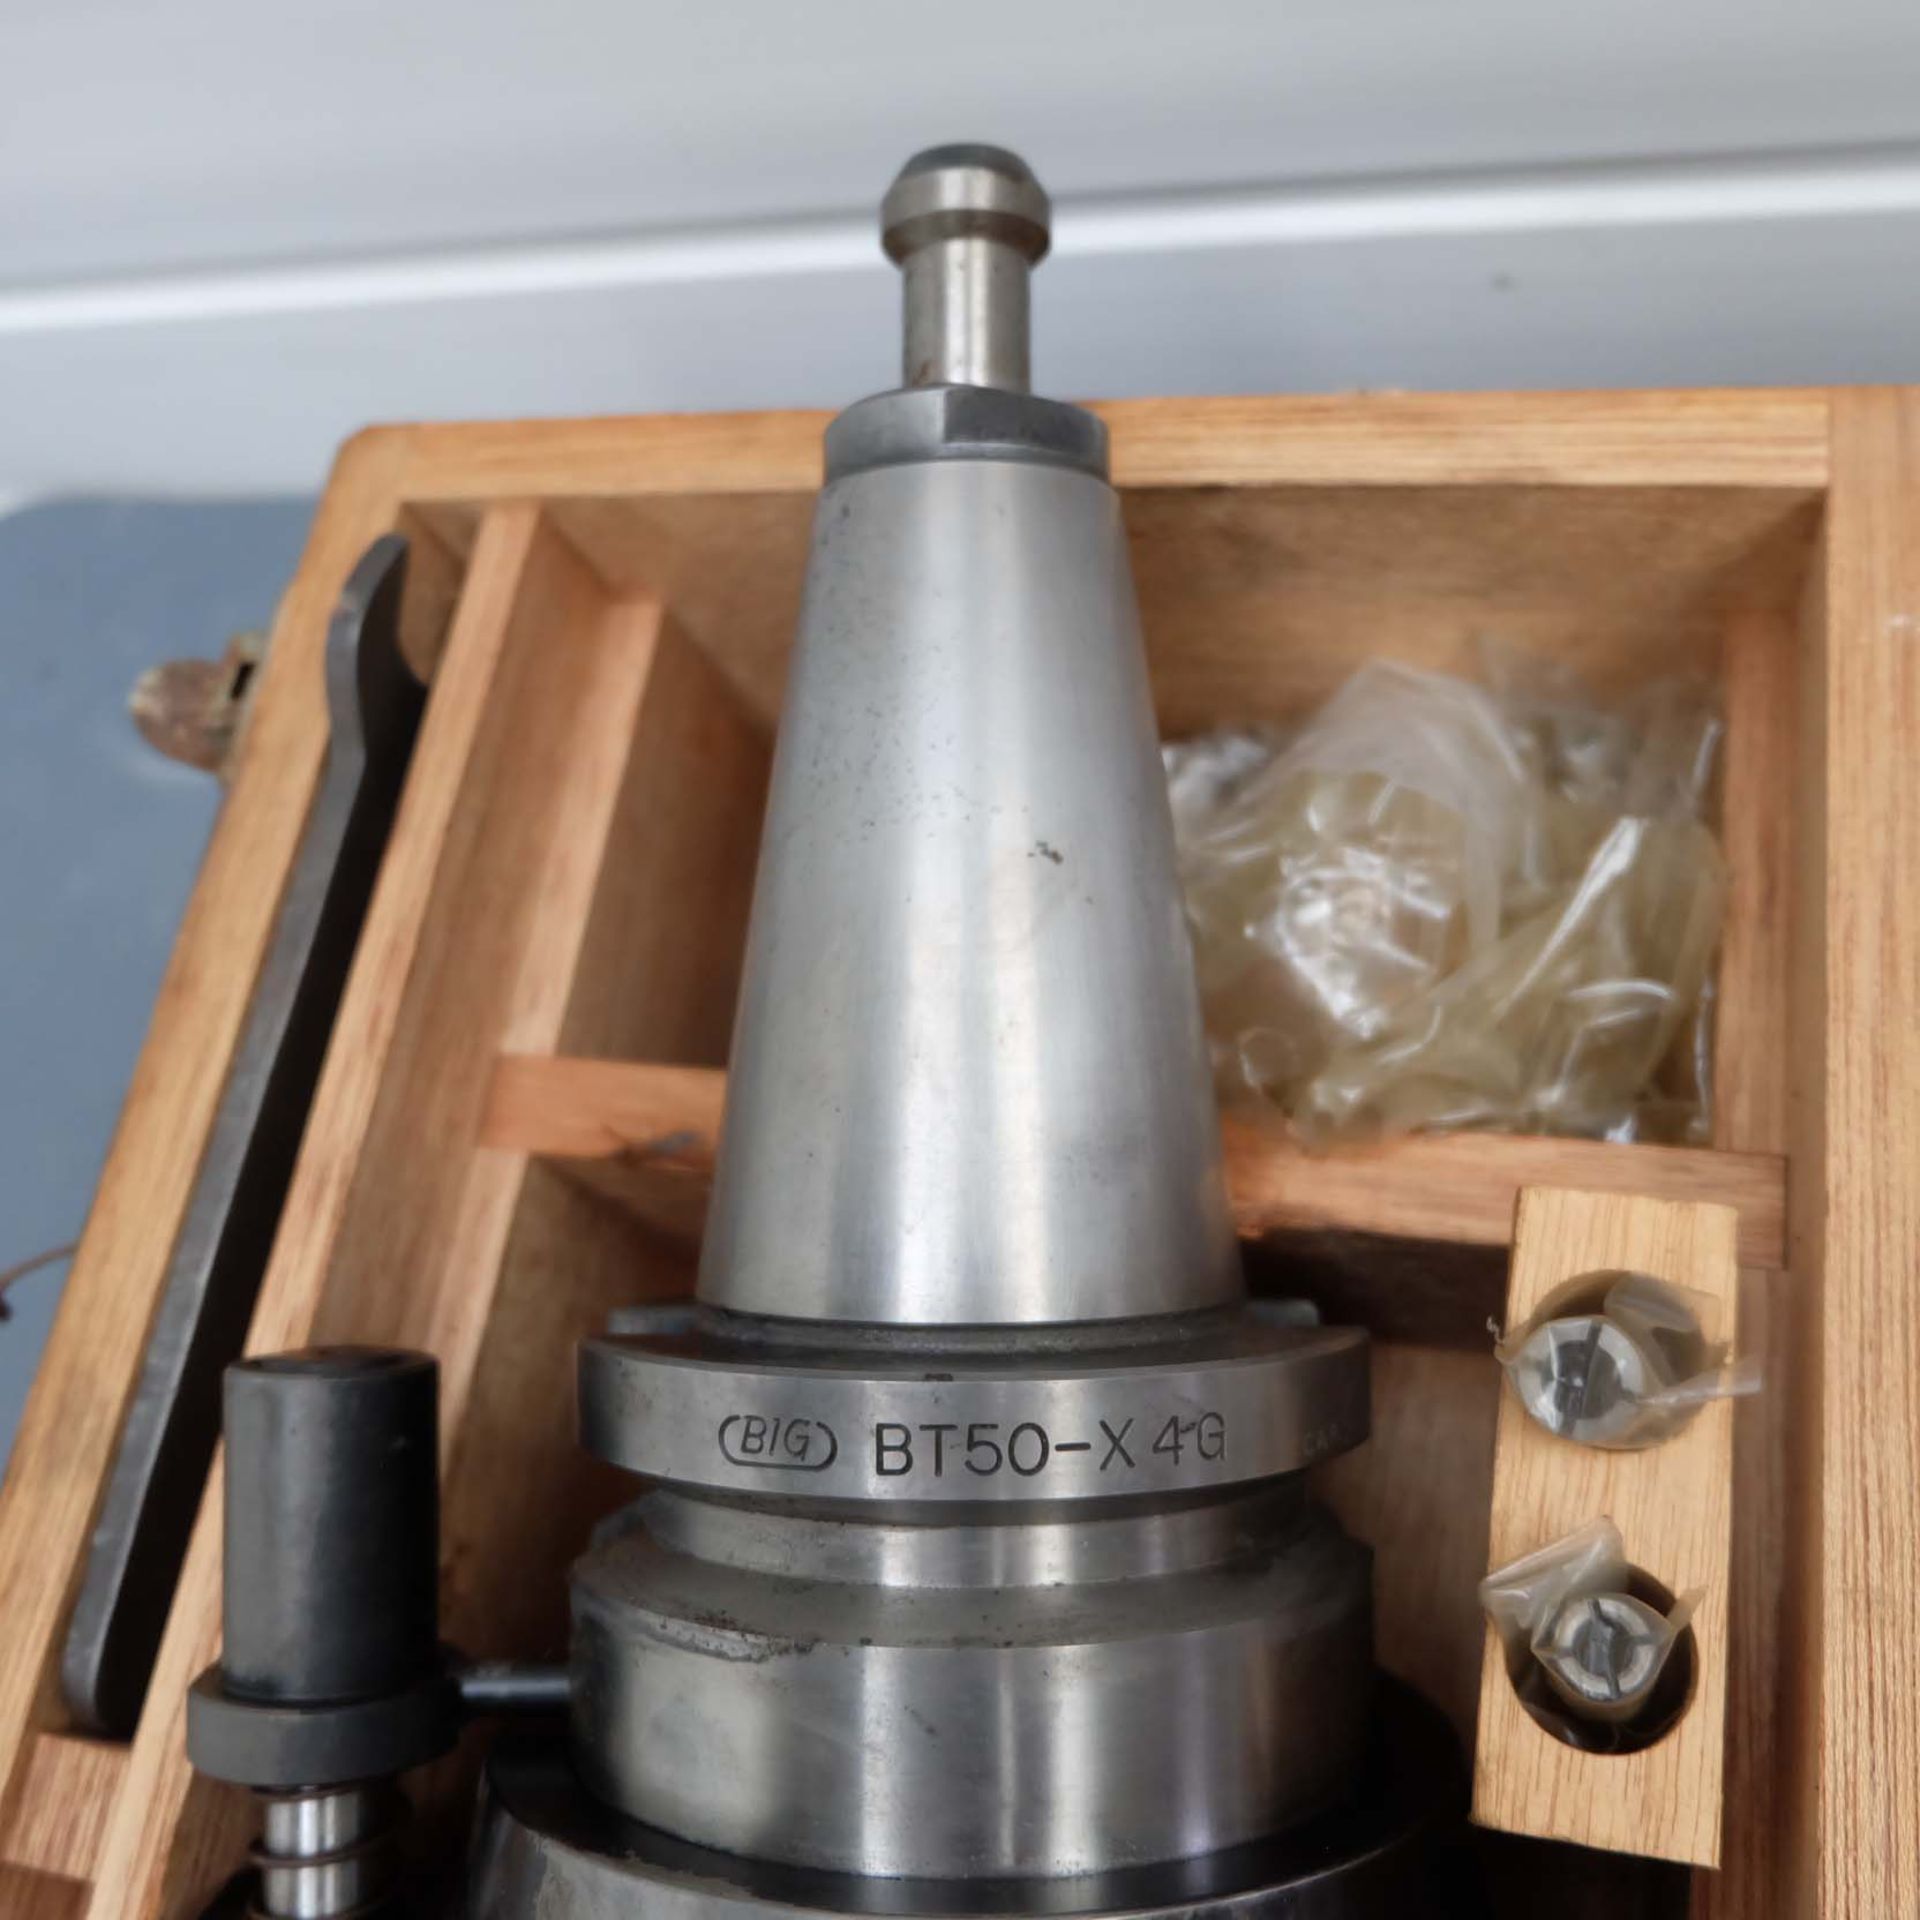 BIG High Spindle Speed Increaser - X4G By Daishower Seiki Co. Ltd With BT 50 Spindle In Wooden Box. - Image 4 of 5